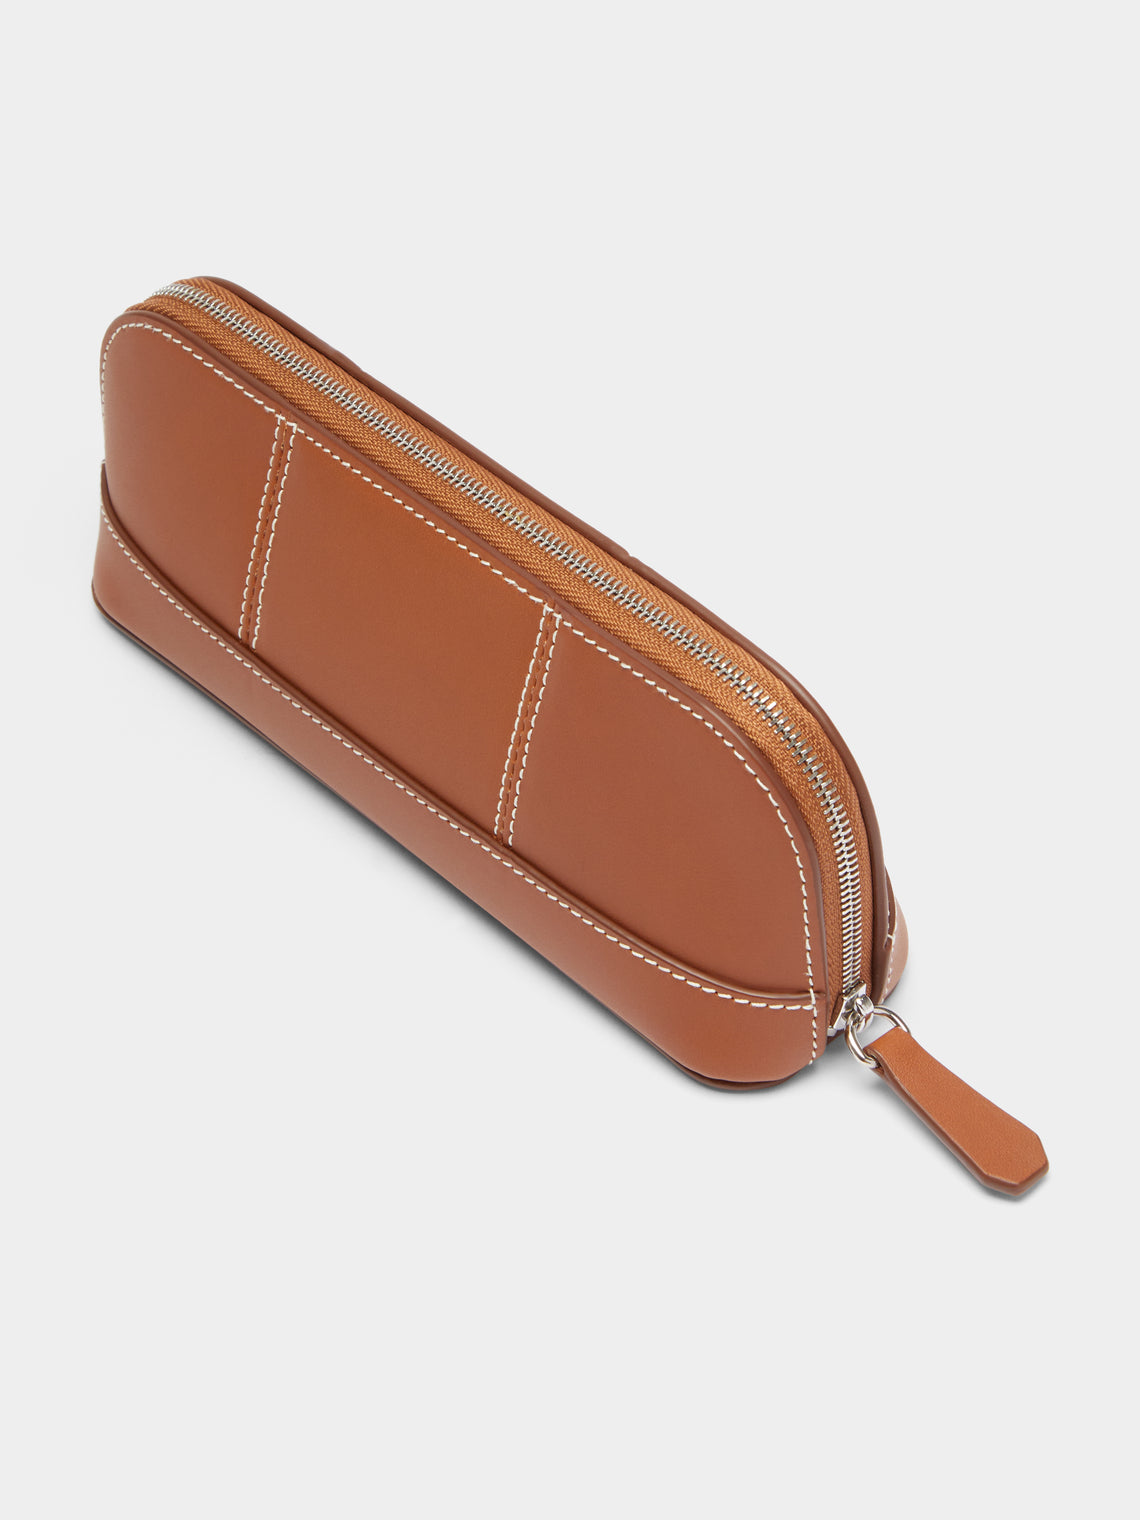 Connolly - Leather Pencil Case - Tan - ABASK